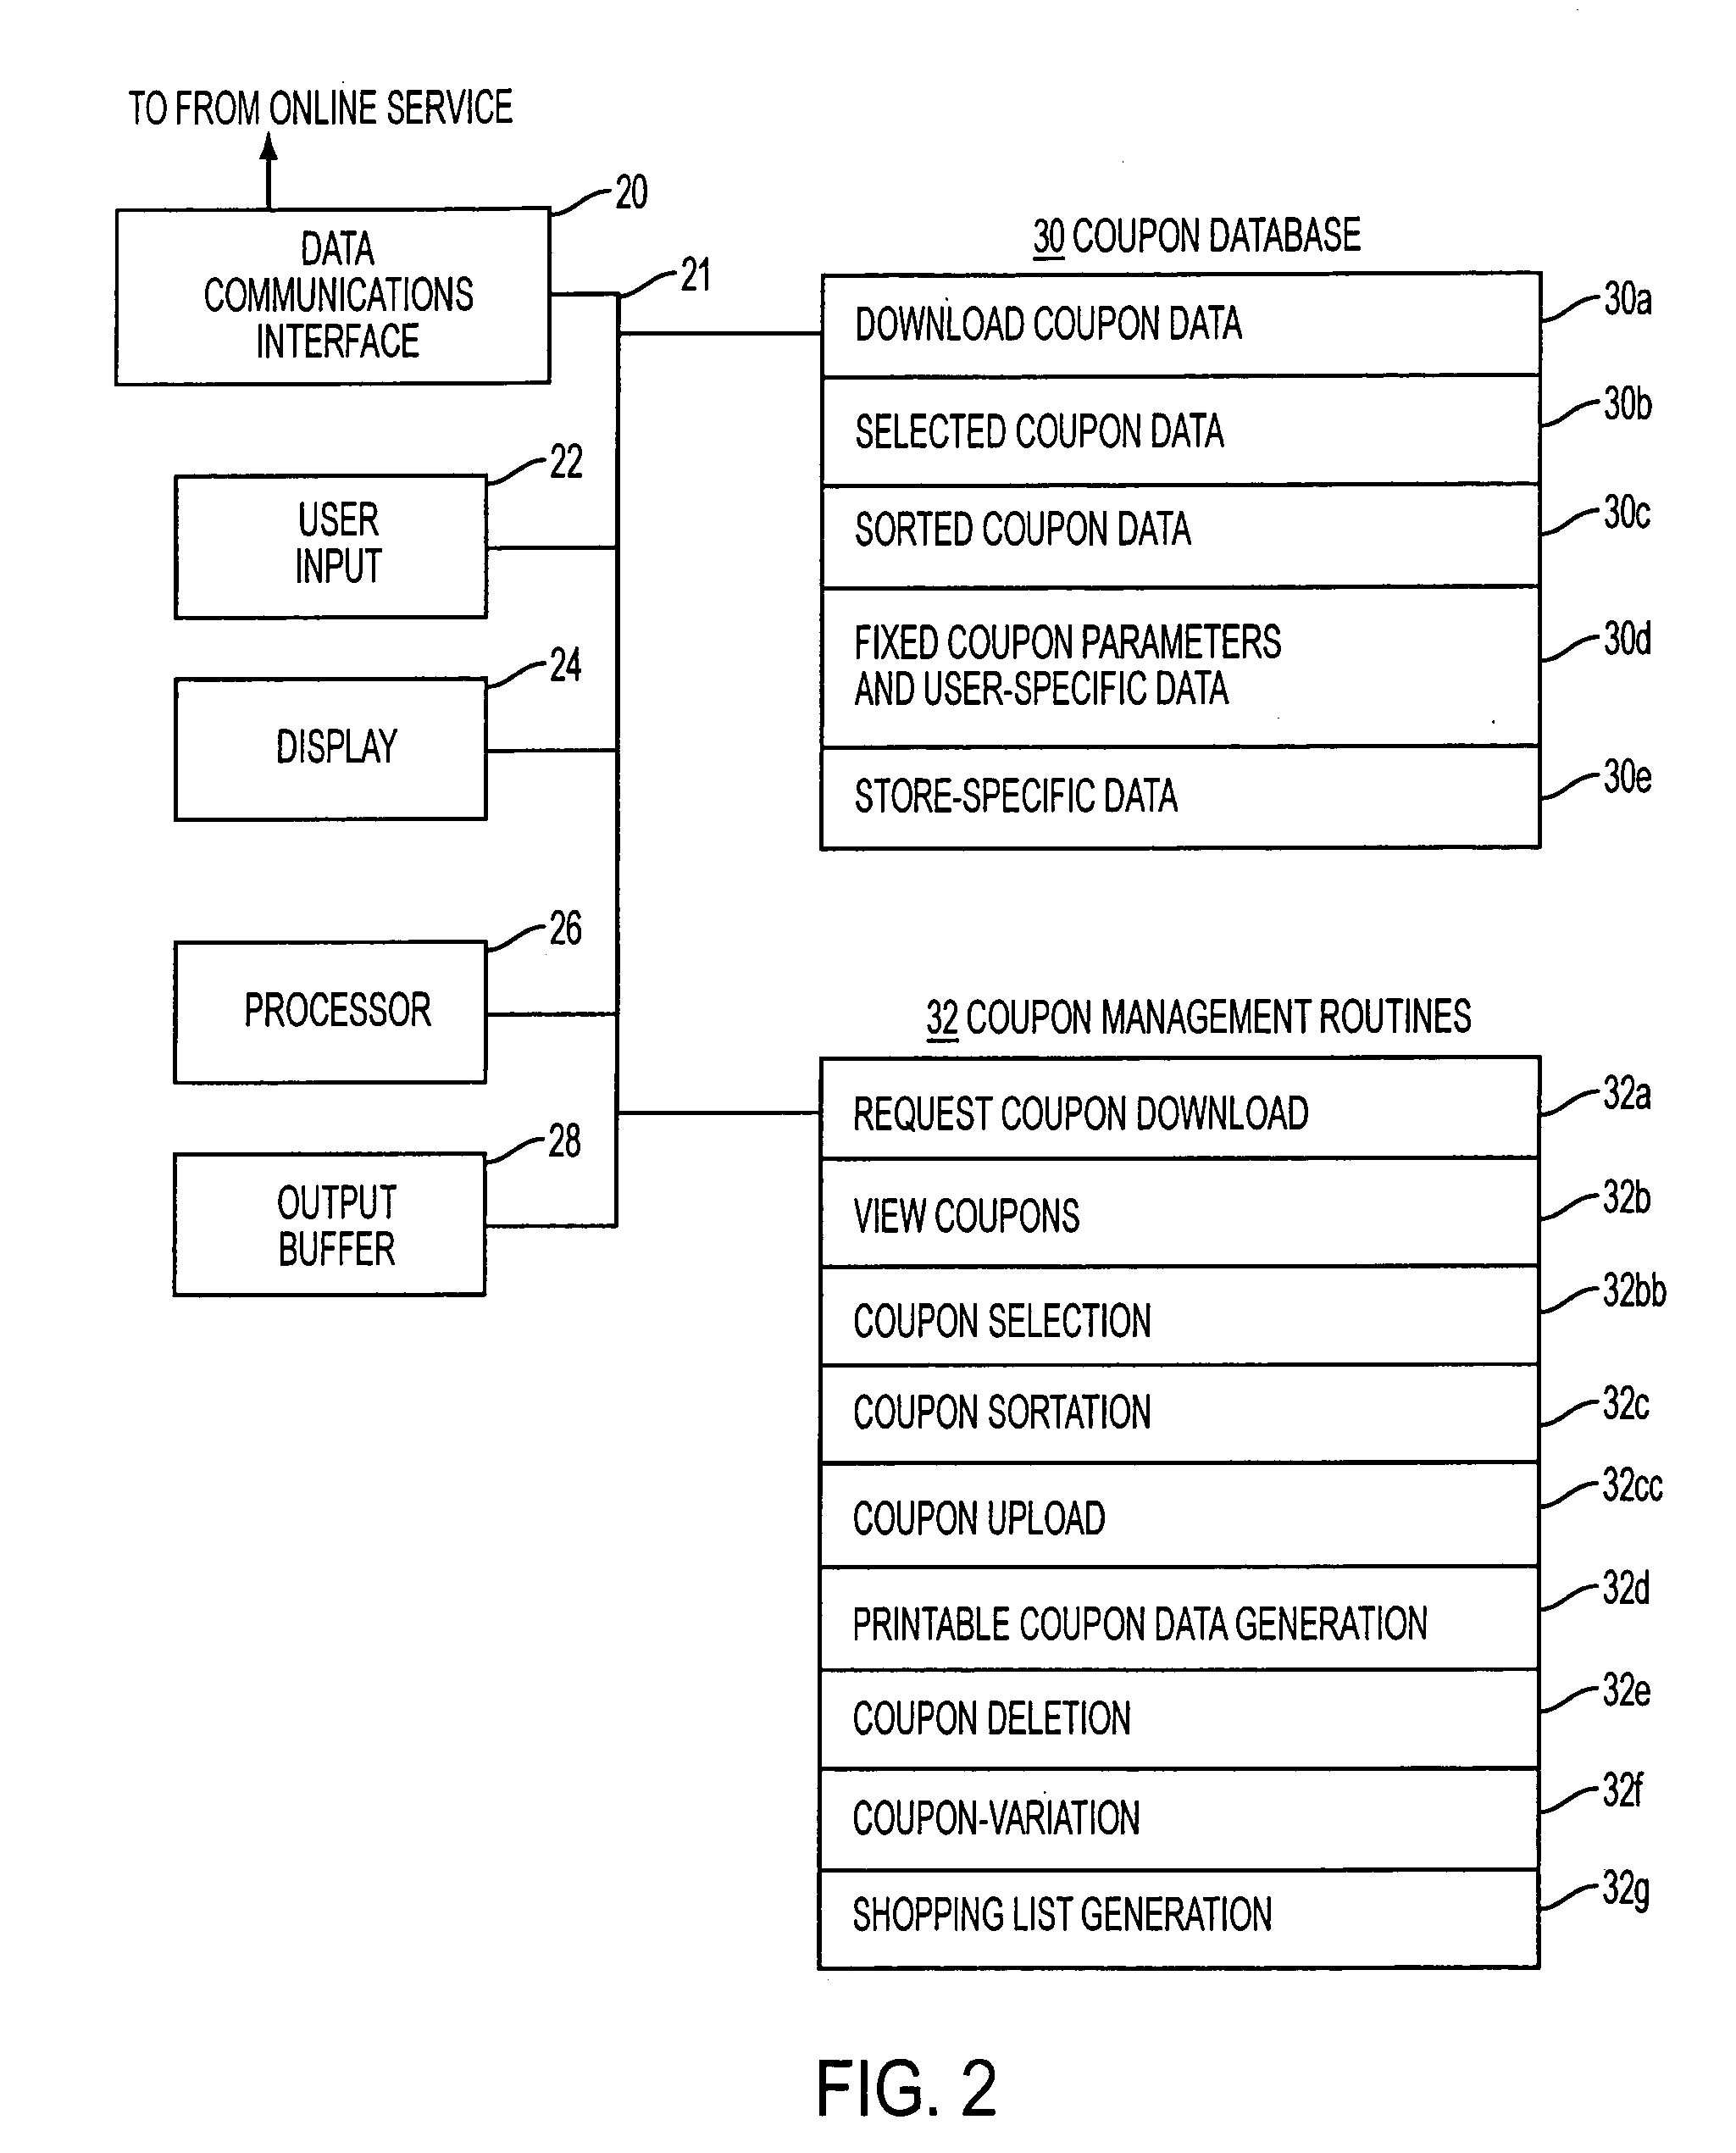 Method and system for generating intelligent electronic banners based on user information